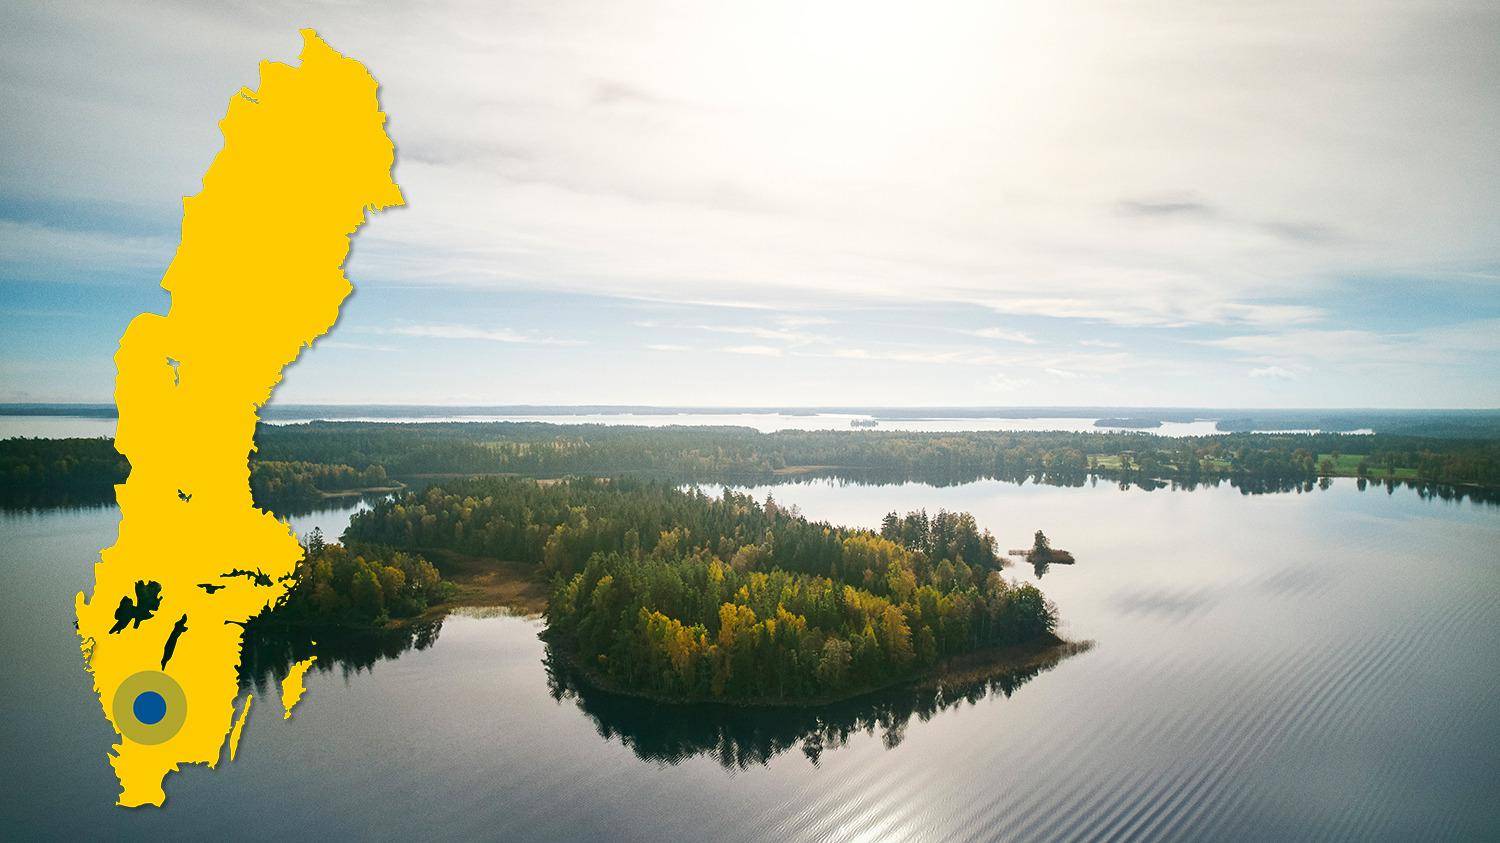 An aerial view of lake Bolmen and its islands. There is a yellow map of Sweden with a blue dot that marks the location of lake Bolmen.